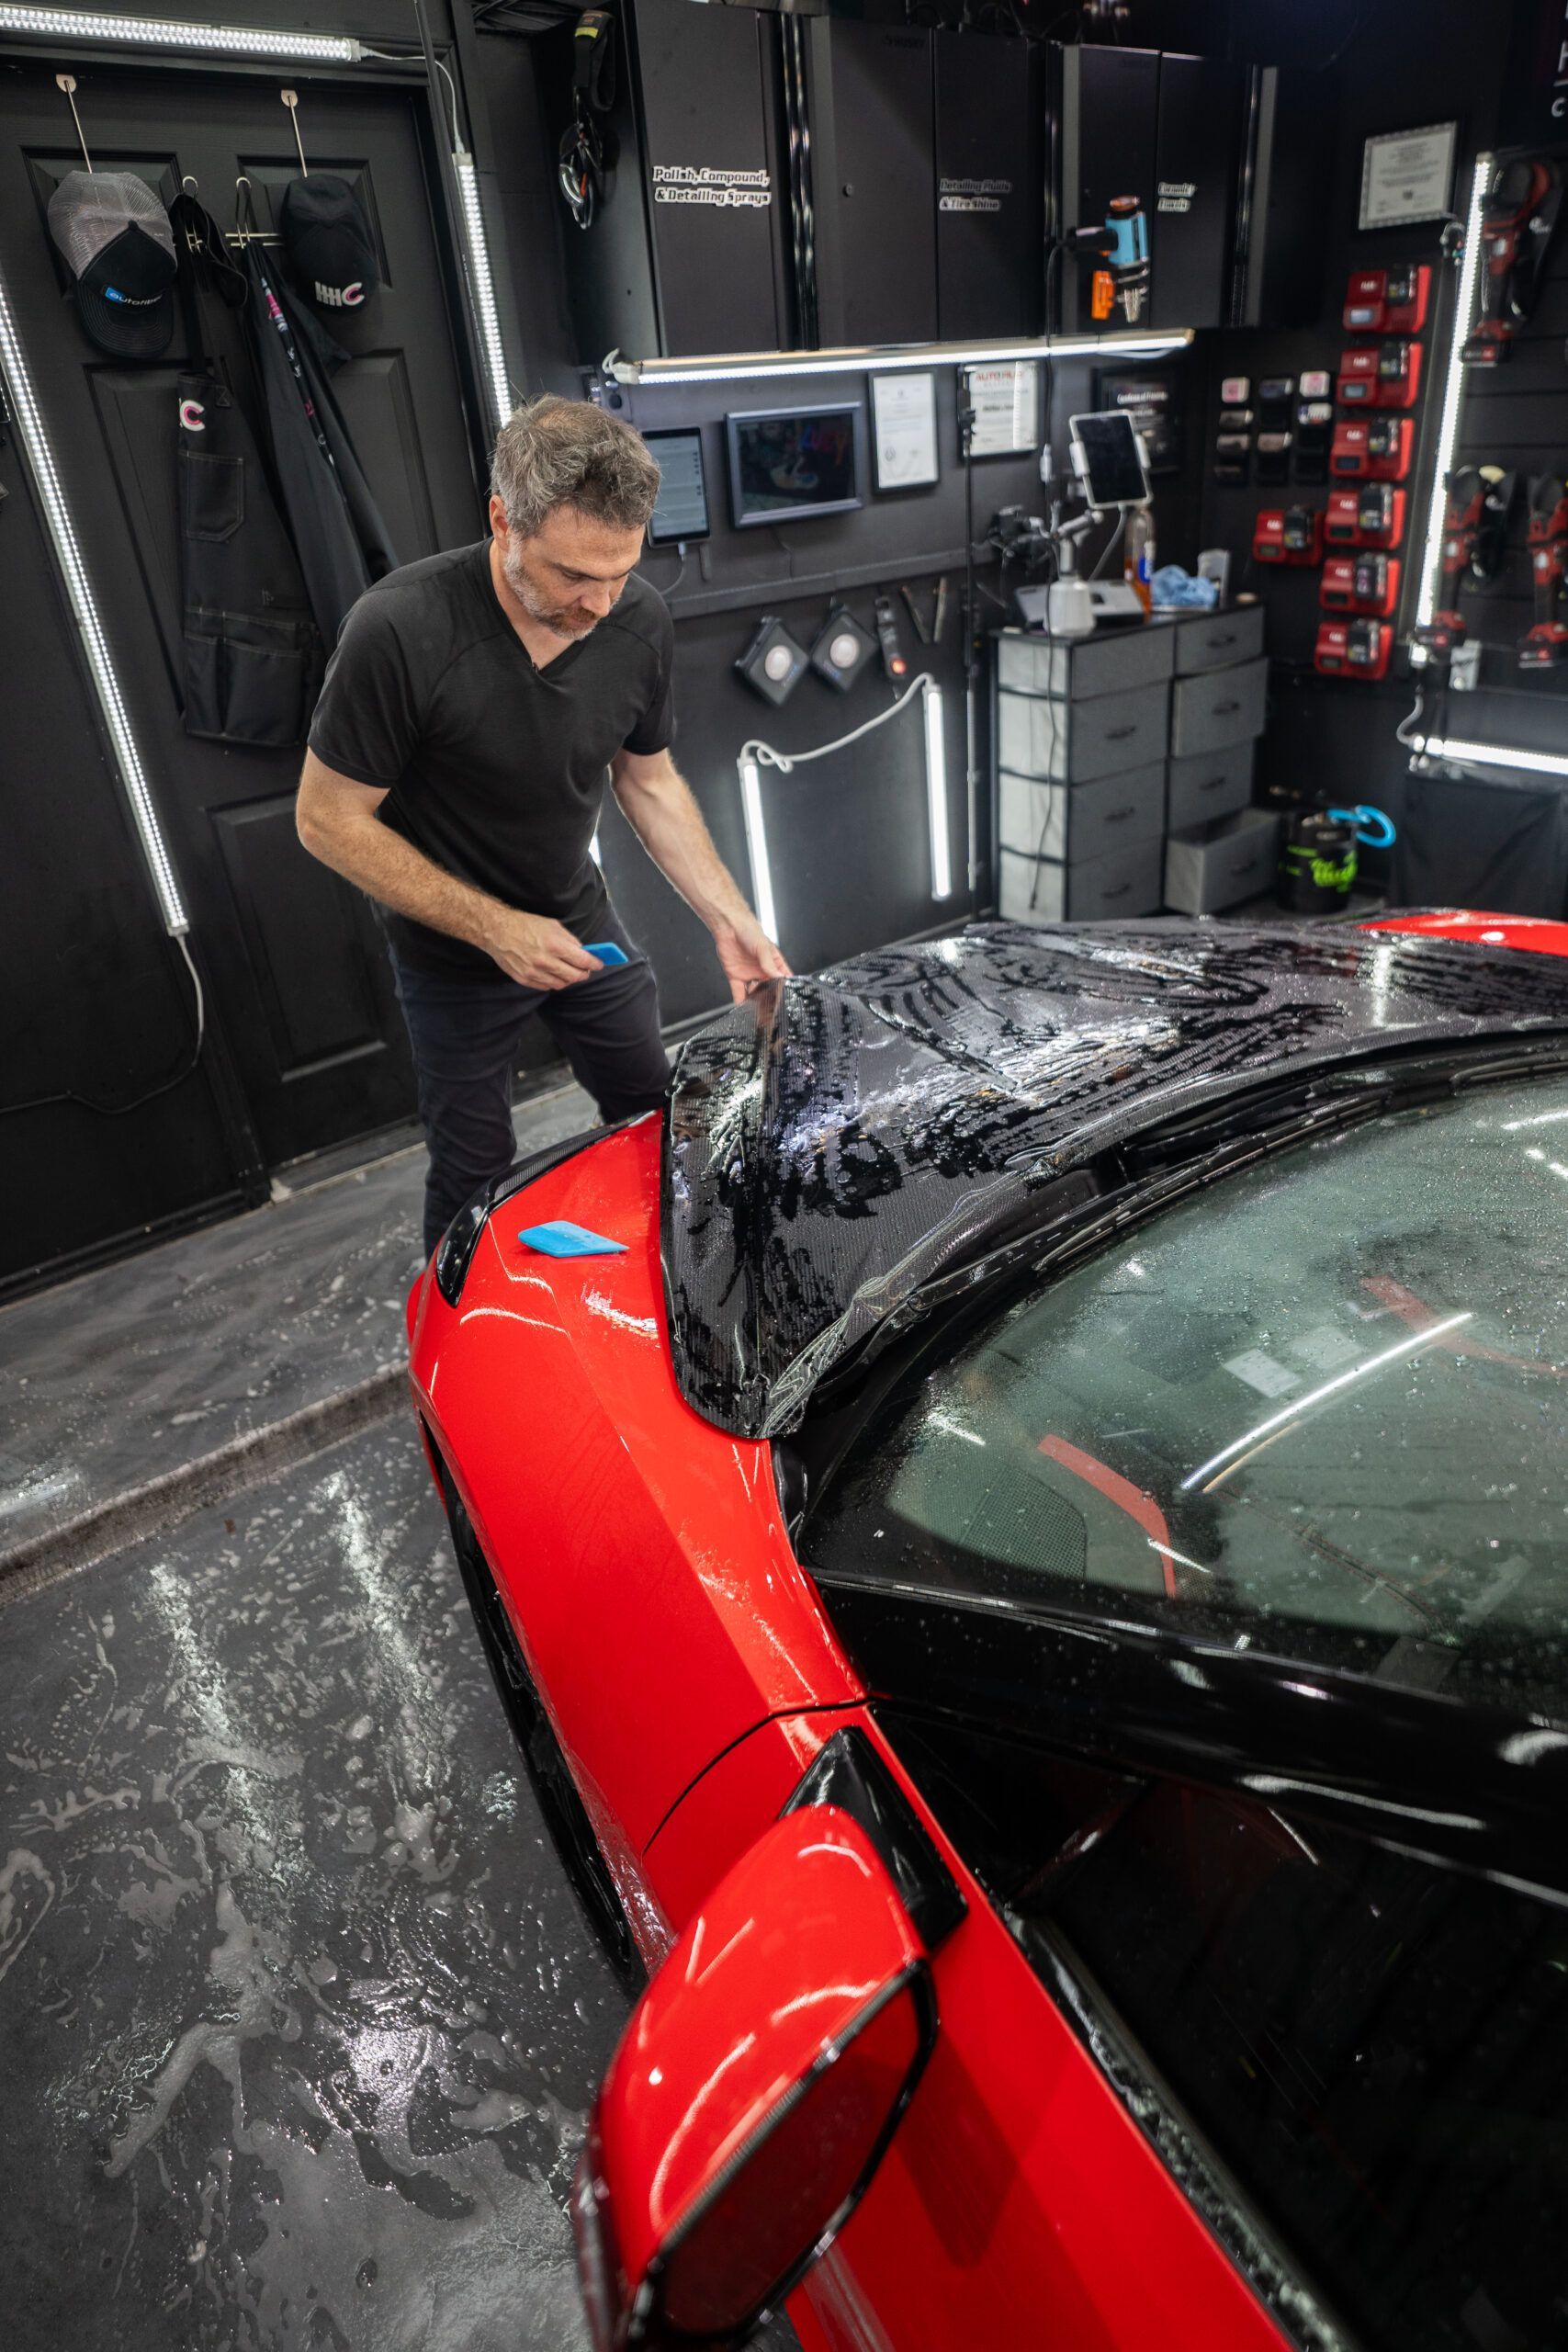 A man is washing a red sports car in a garage.